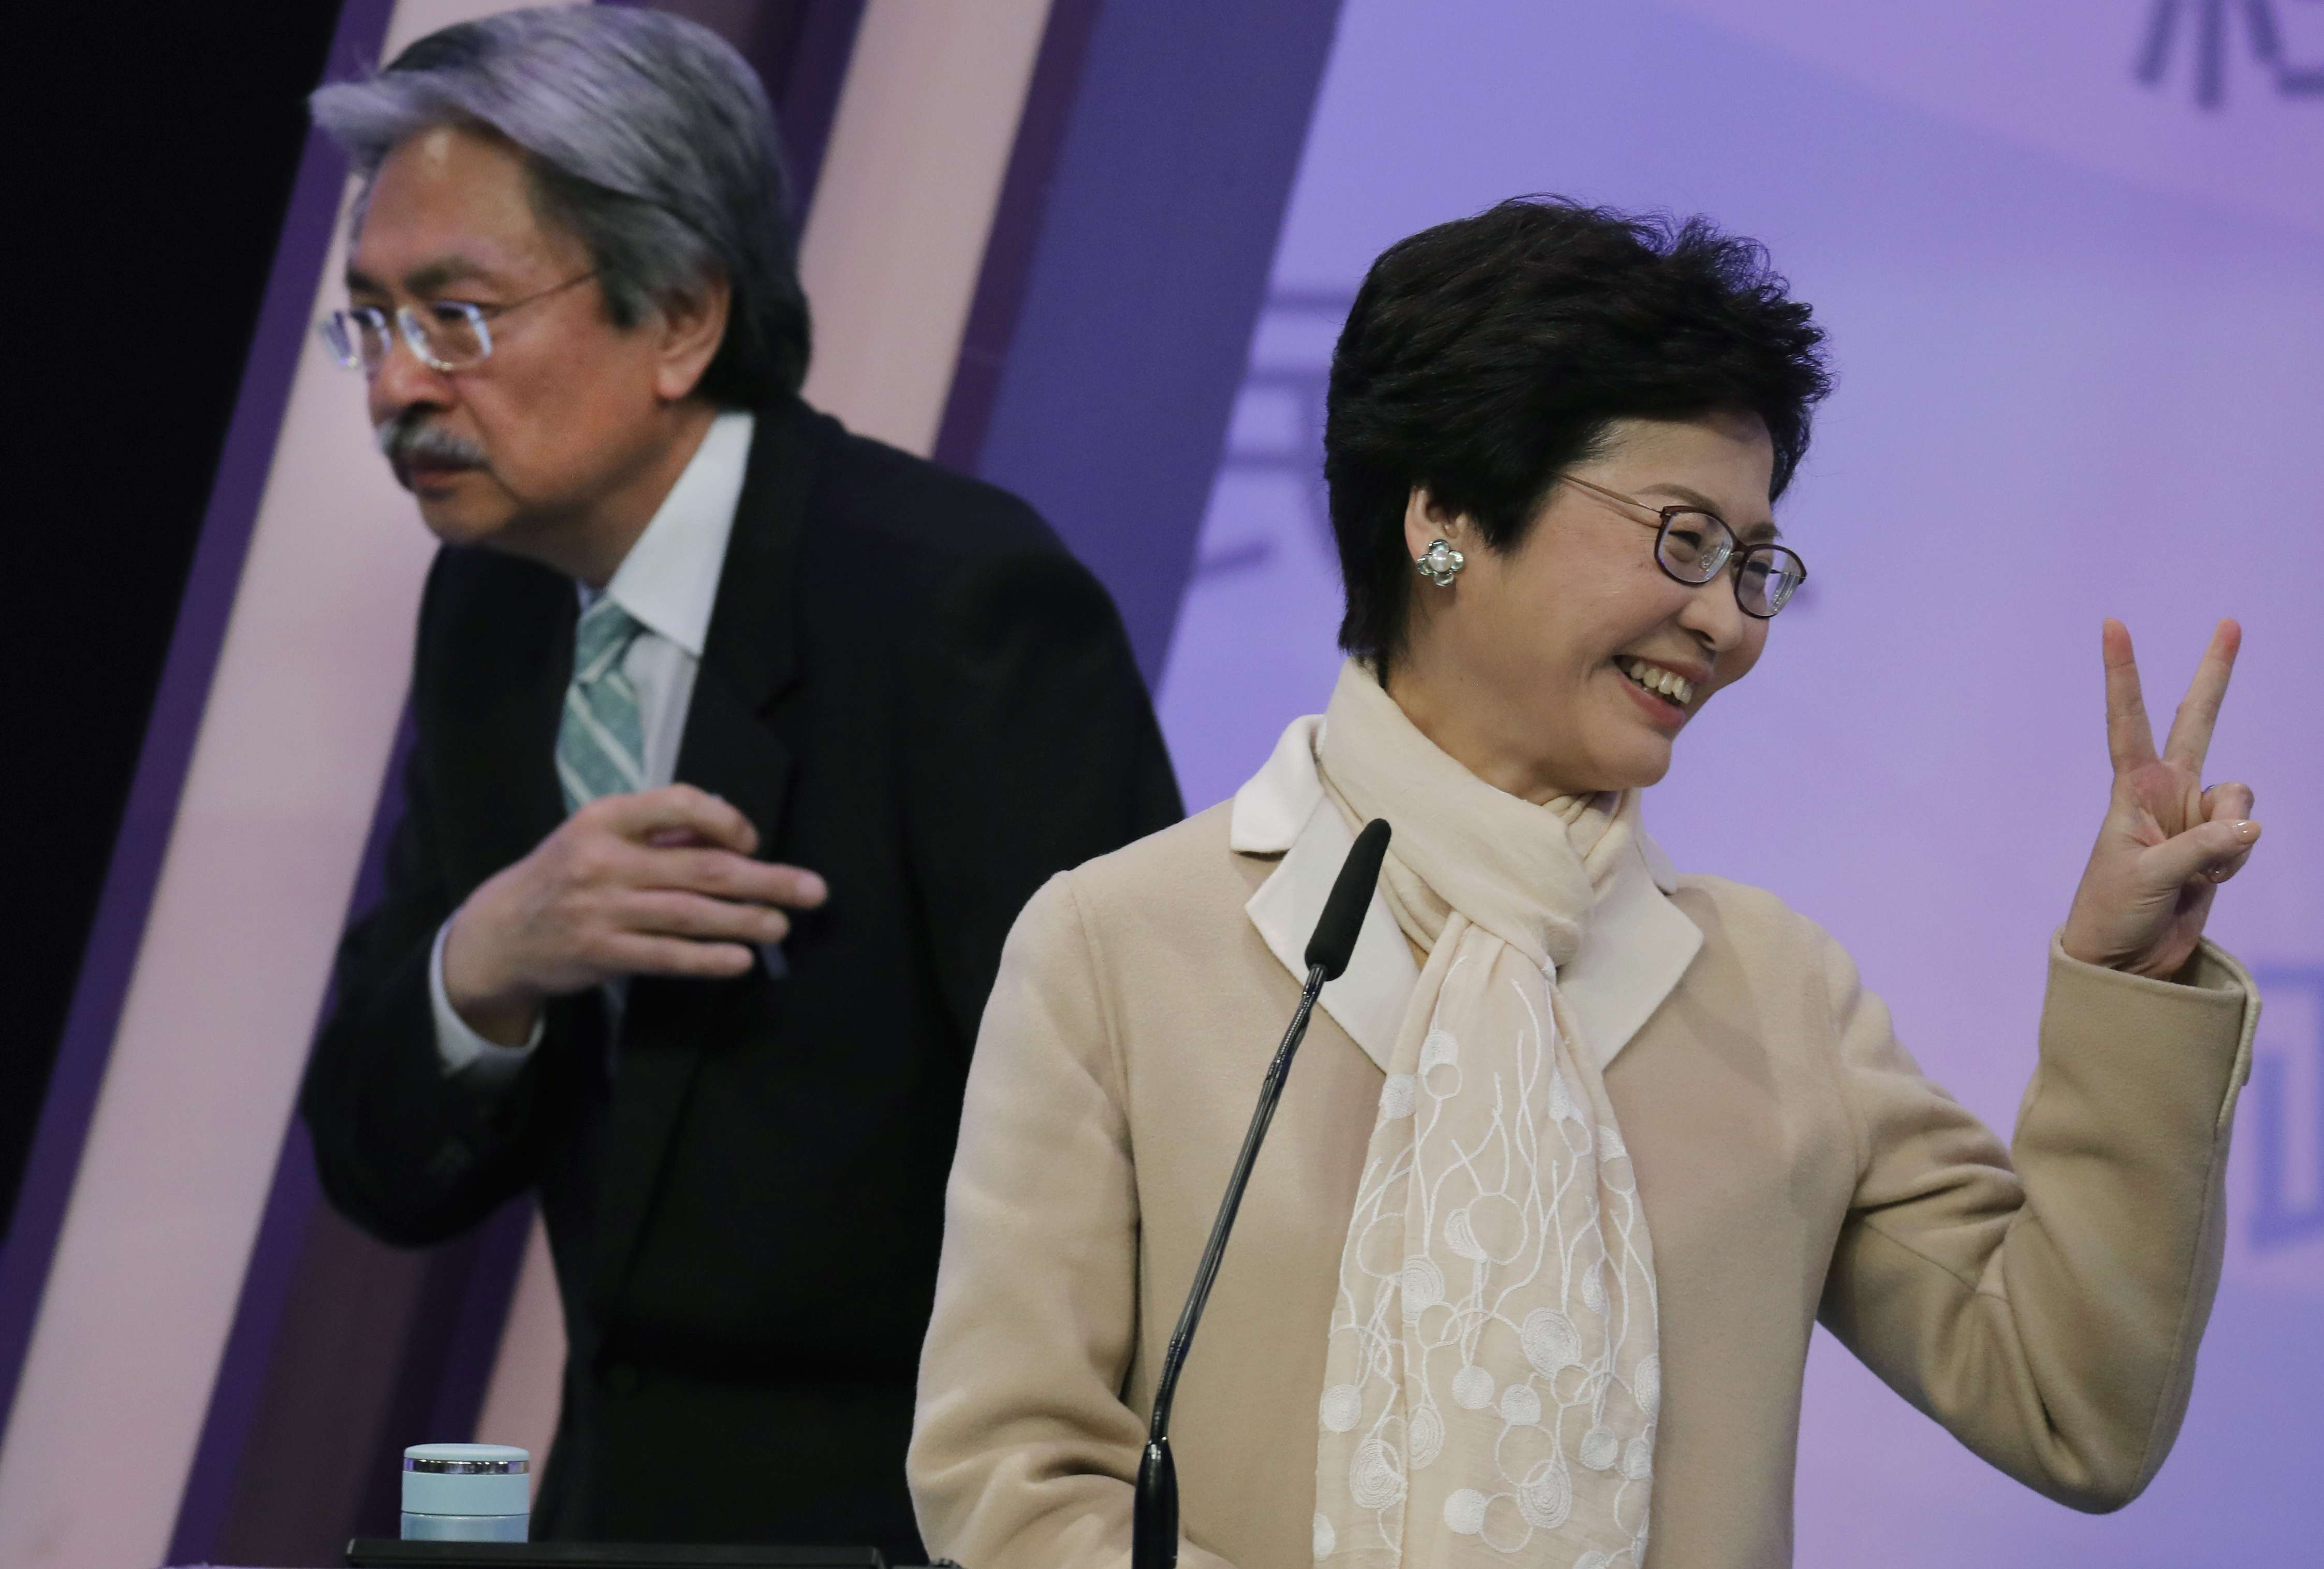 Rival candidates John Tsang and Carrie Lam at an election debate on March 14, with less than two weeks to go before a 1,194-member committee makes its choice among three hopefuls, the third being retired judge Woo Kwok-hing. Photo: AP